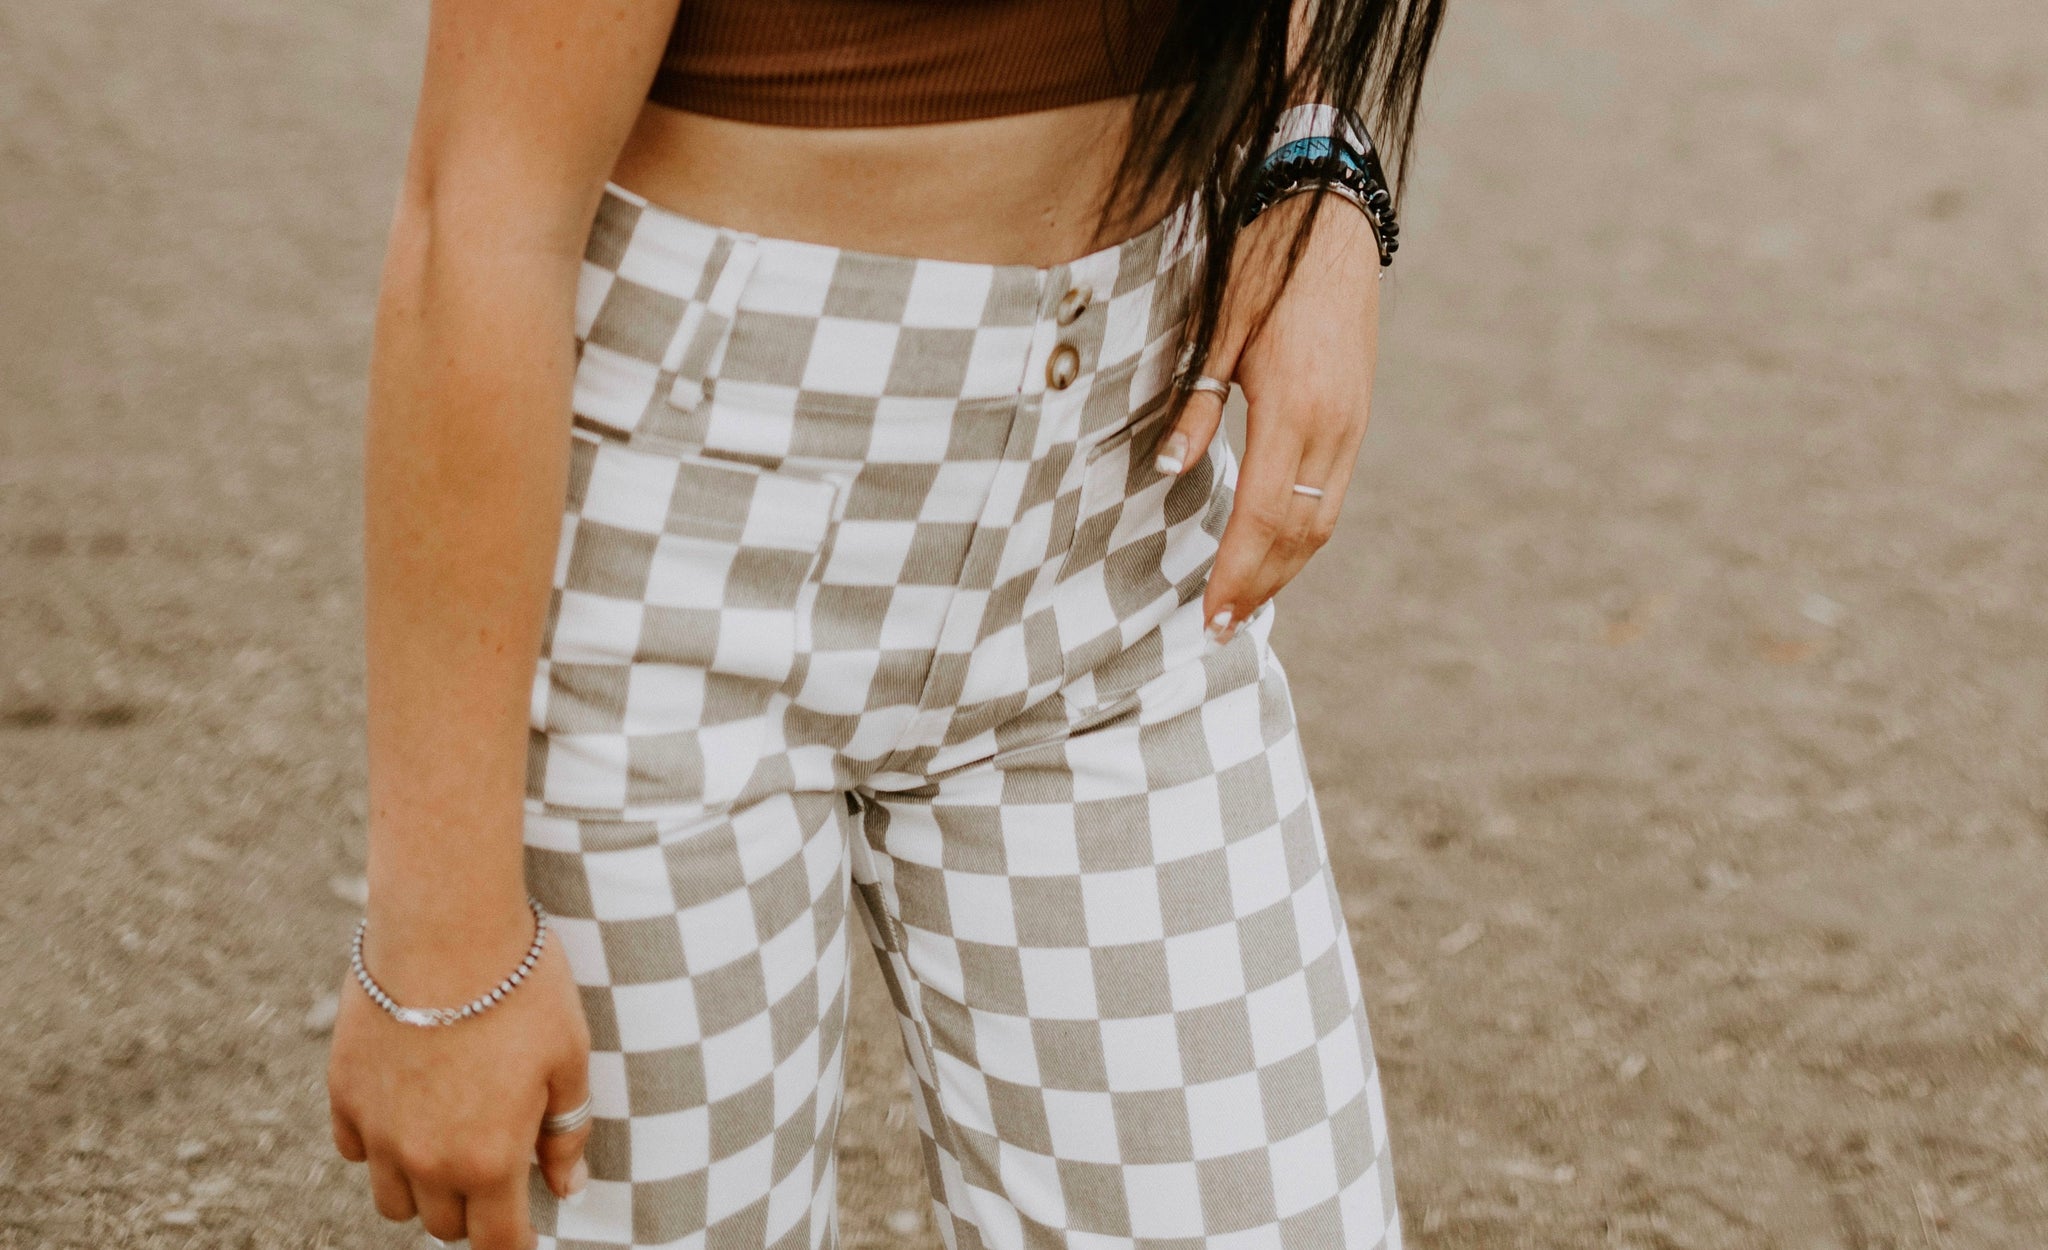 Black & White Gingham Pants Outfit — bows & sequins